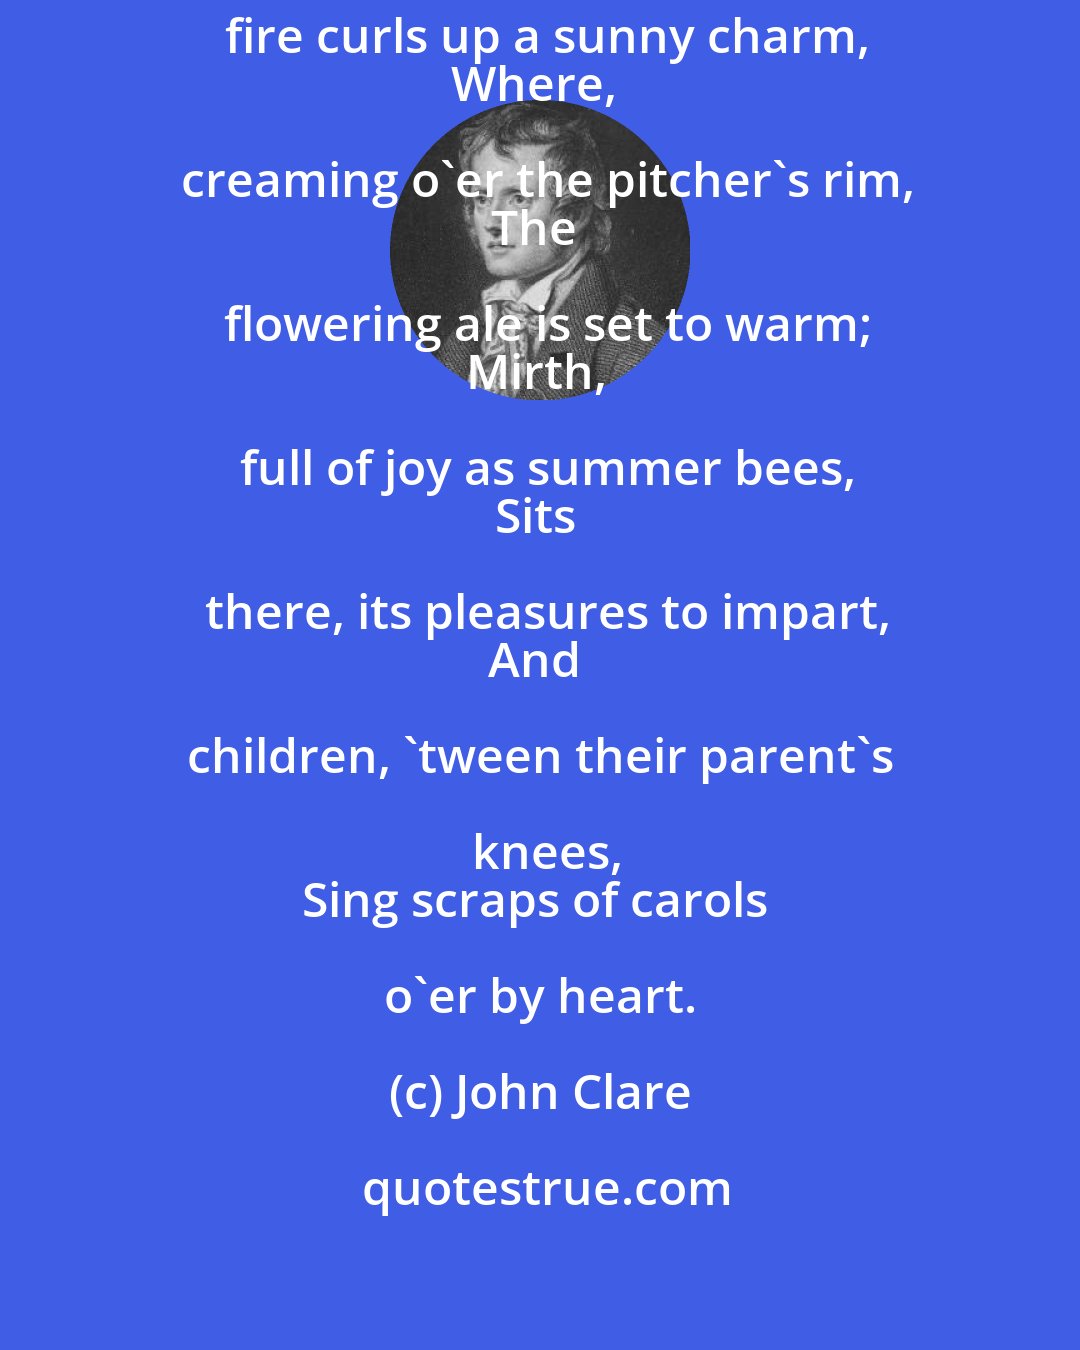 John Clare: While snow the window-panes bedim,
The fire curls up a sunny charm,
Where, creaming o'er the pitcher's rim,
The flowering ale is set to warm;
Mirth, full of joy as summer bees,
Sits there, its pleasures to impart,
And children, 'tween their parent's knees,
Sing scraps of carols o'er by heart.